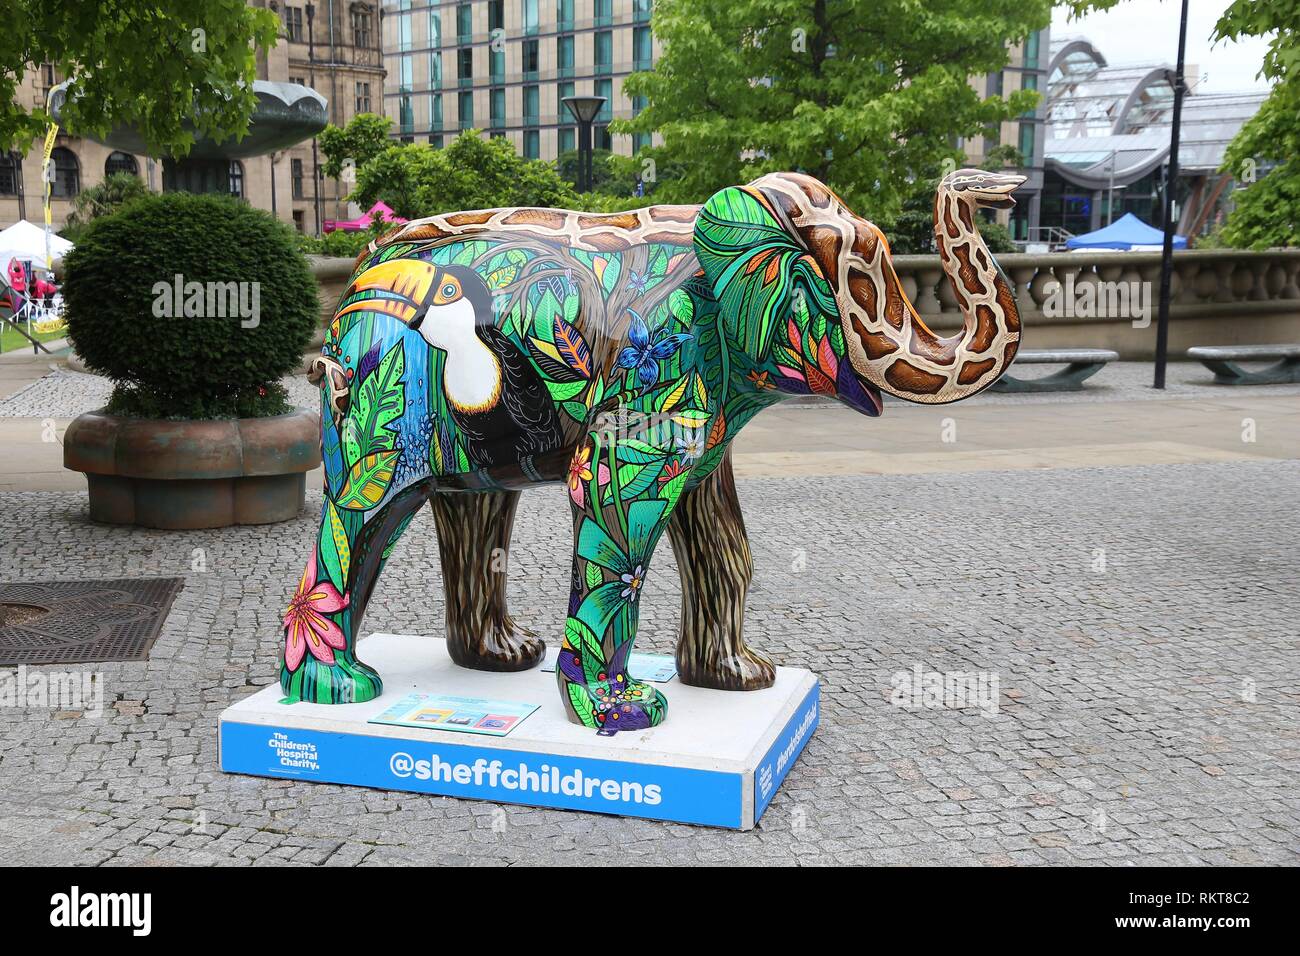 SHEFFIELD, UK - JULY 10, 2016: Painted elephant sculpture in Sheffield, Yorkshire, UK. The elephants were decorated by artists to help Sheffield Child Stock Photo